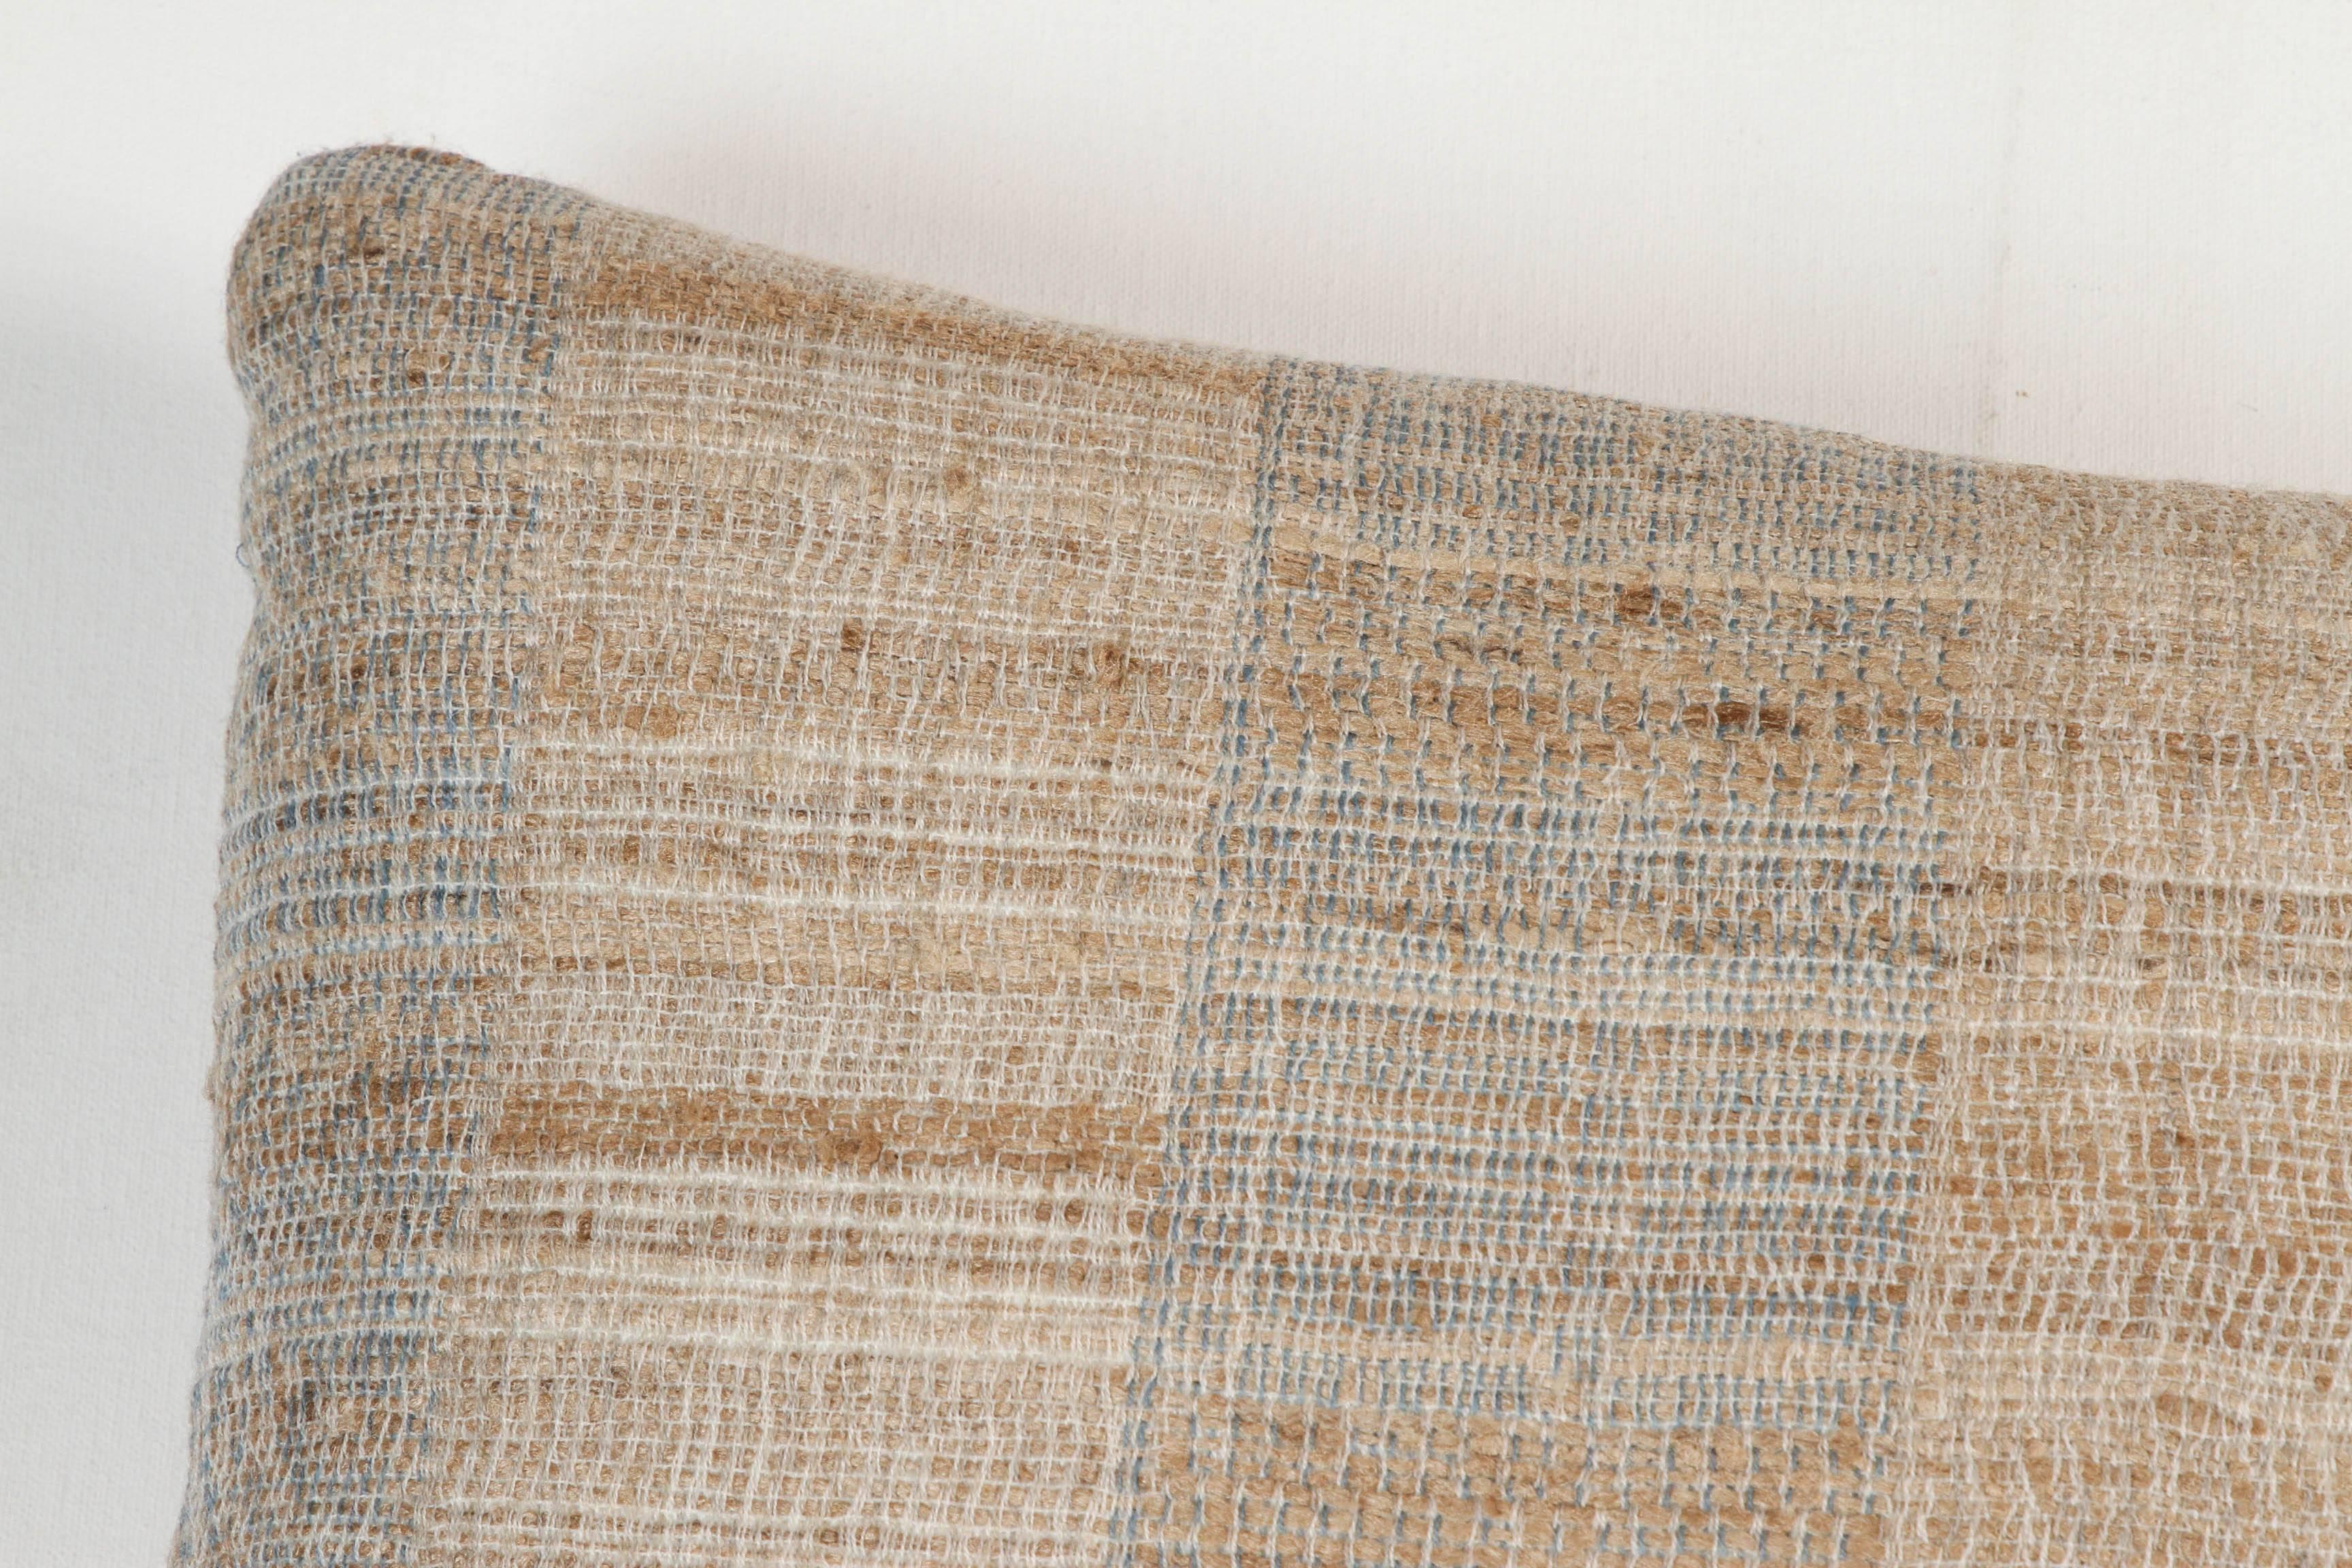 A contemporary line of cushions, pillows, throws, bedcovers, bedspreads and yardage handwoven in India on antique Jacquard looms. Handspun wool, cotton, linen, and raw silk give the textiles an appealing uneven quality.

This wool and raw tussar